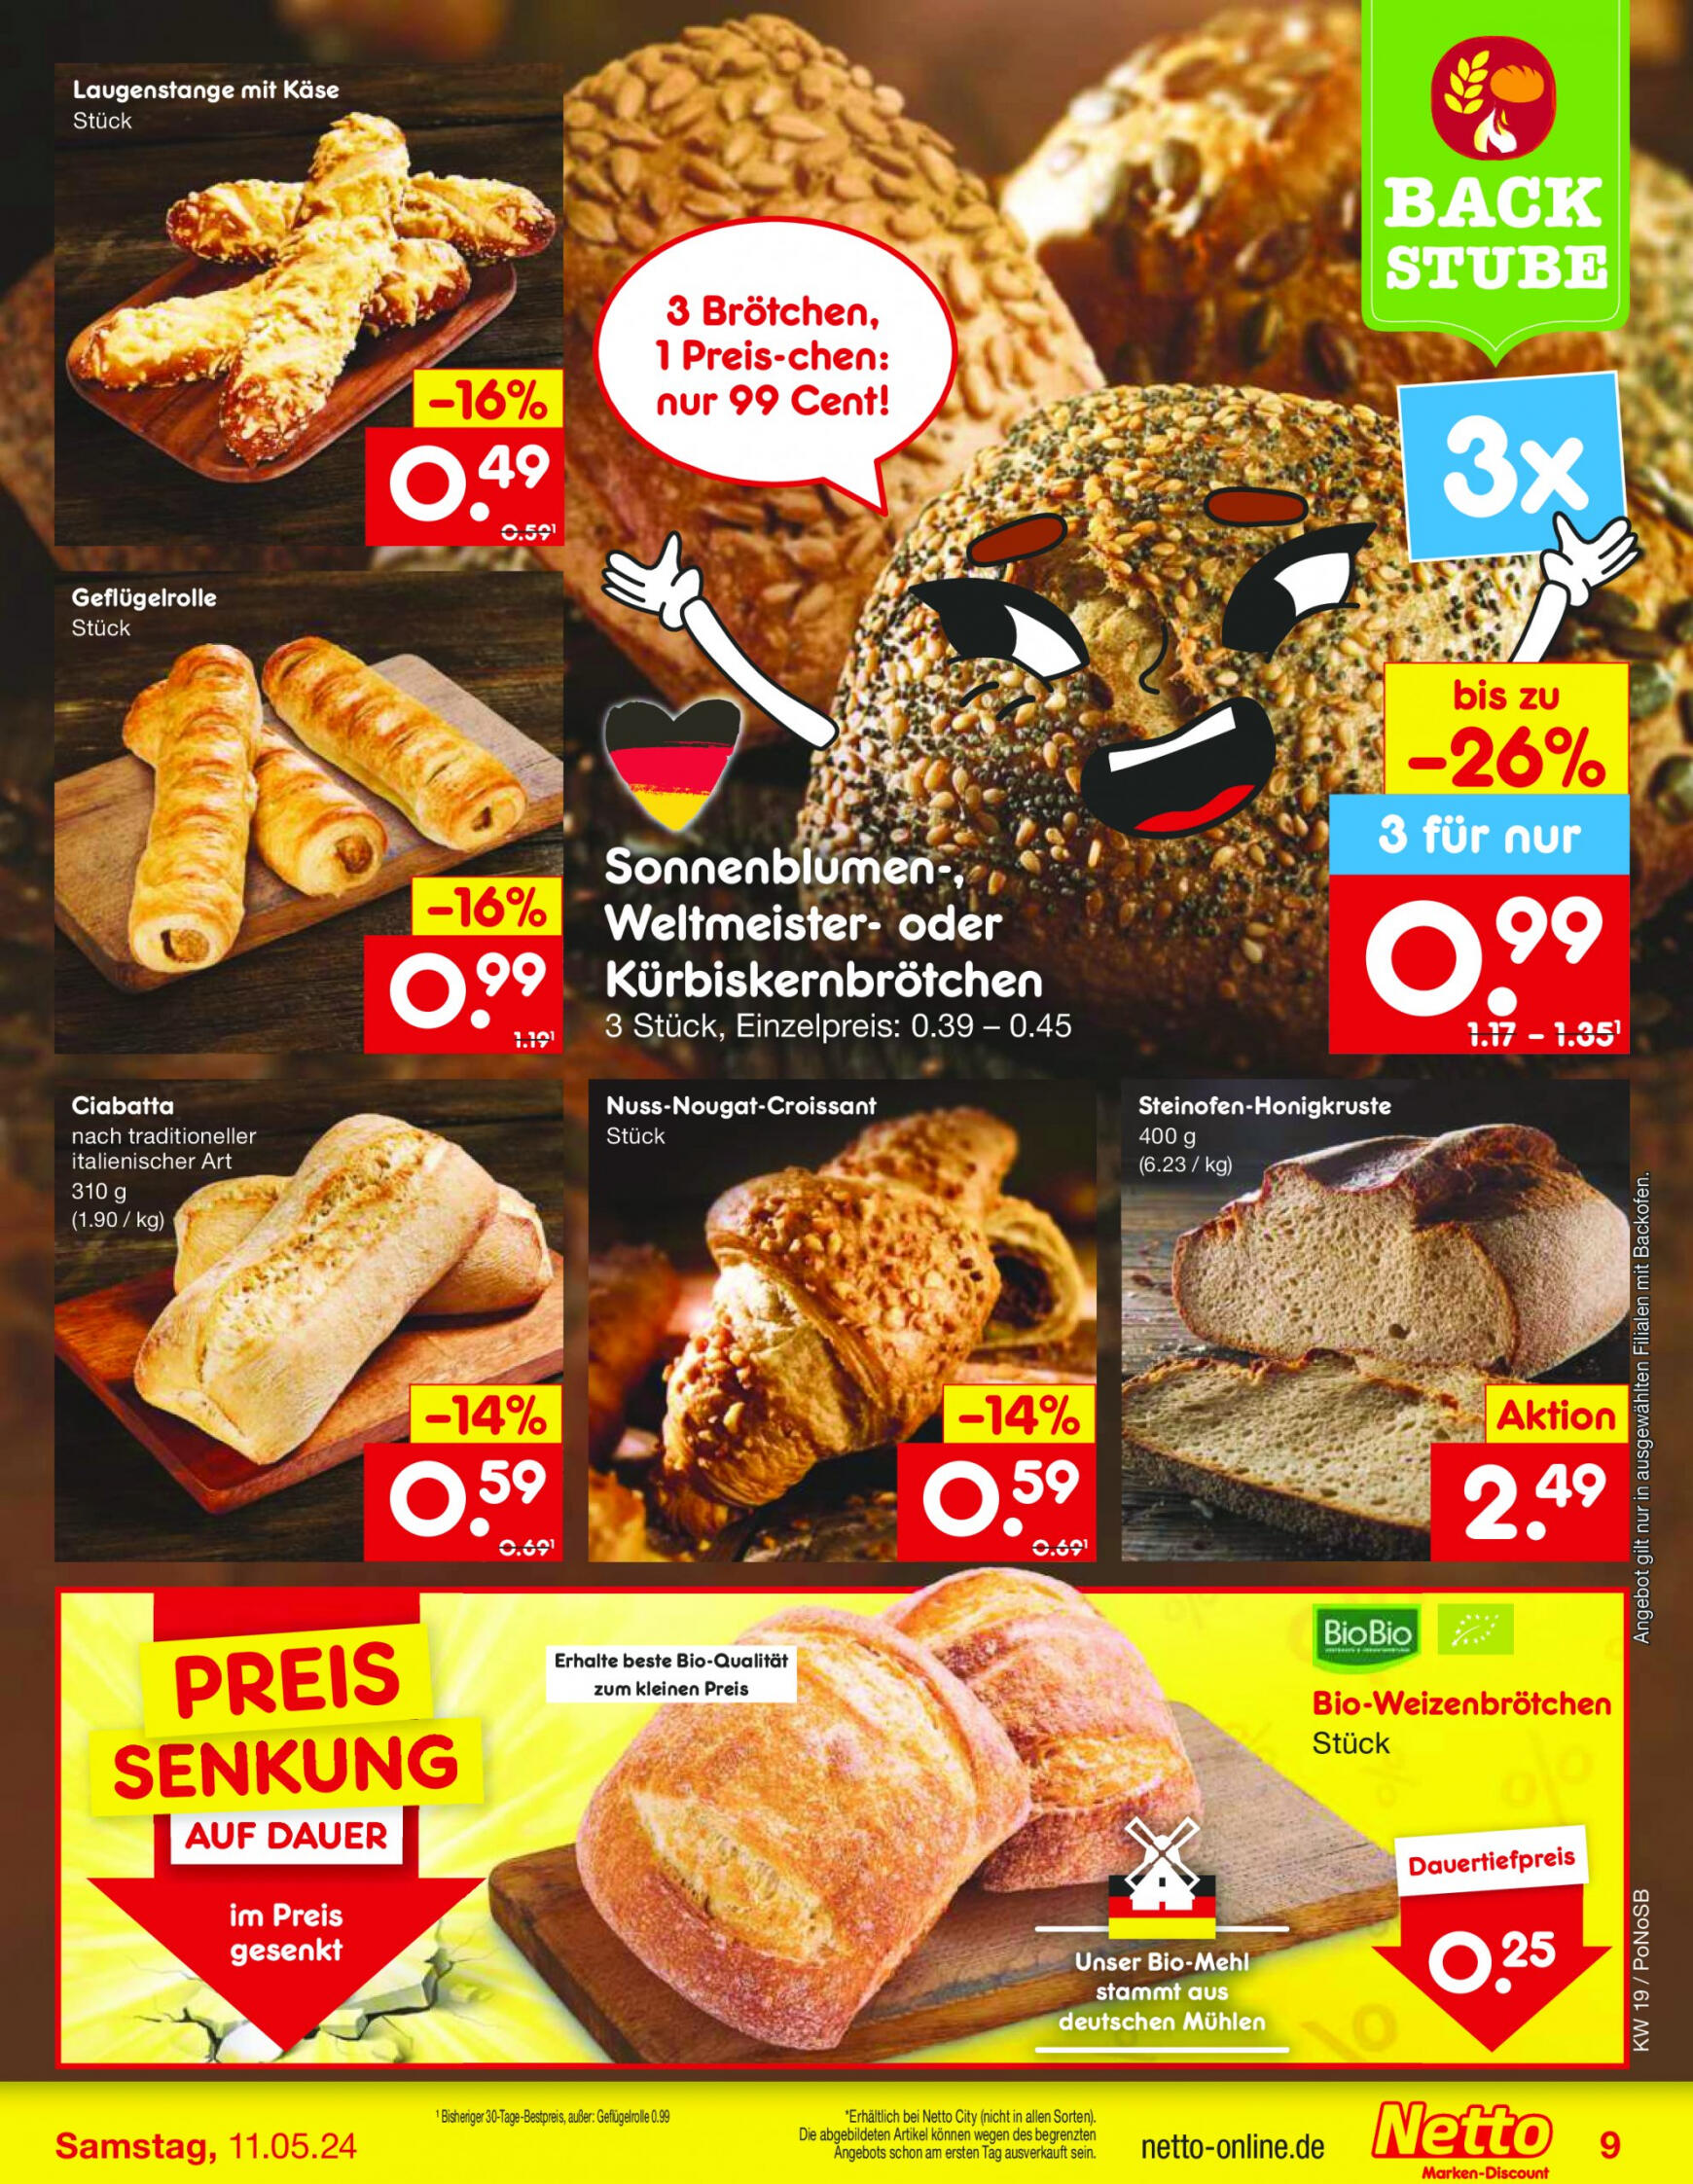 netto - Flyer Netto aktuell 06.05. - 11.05. - page: 9